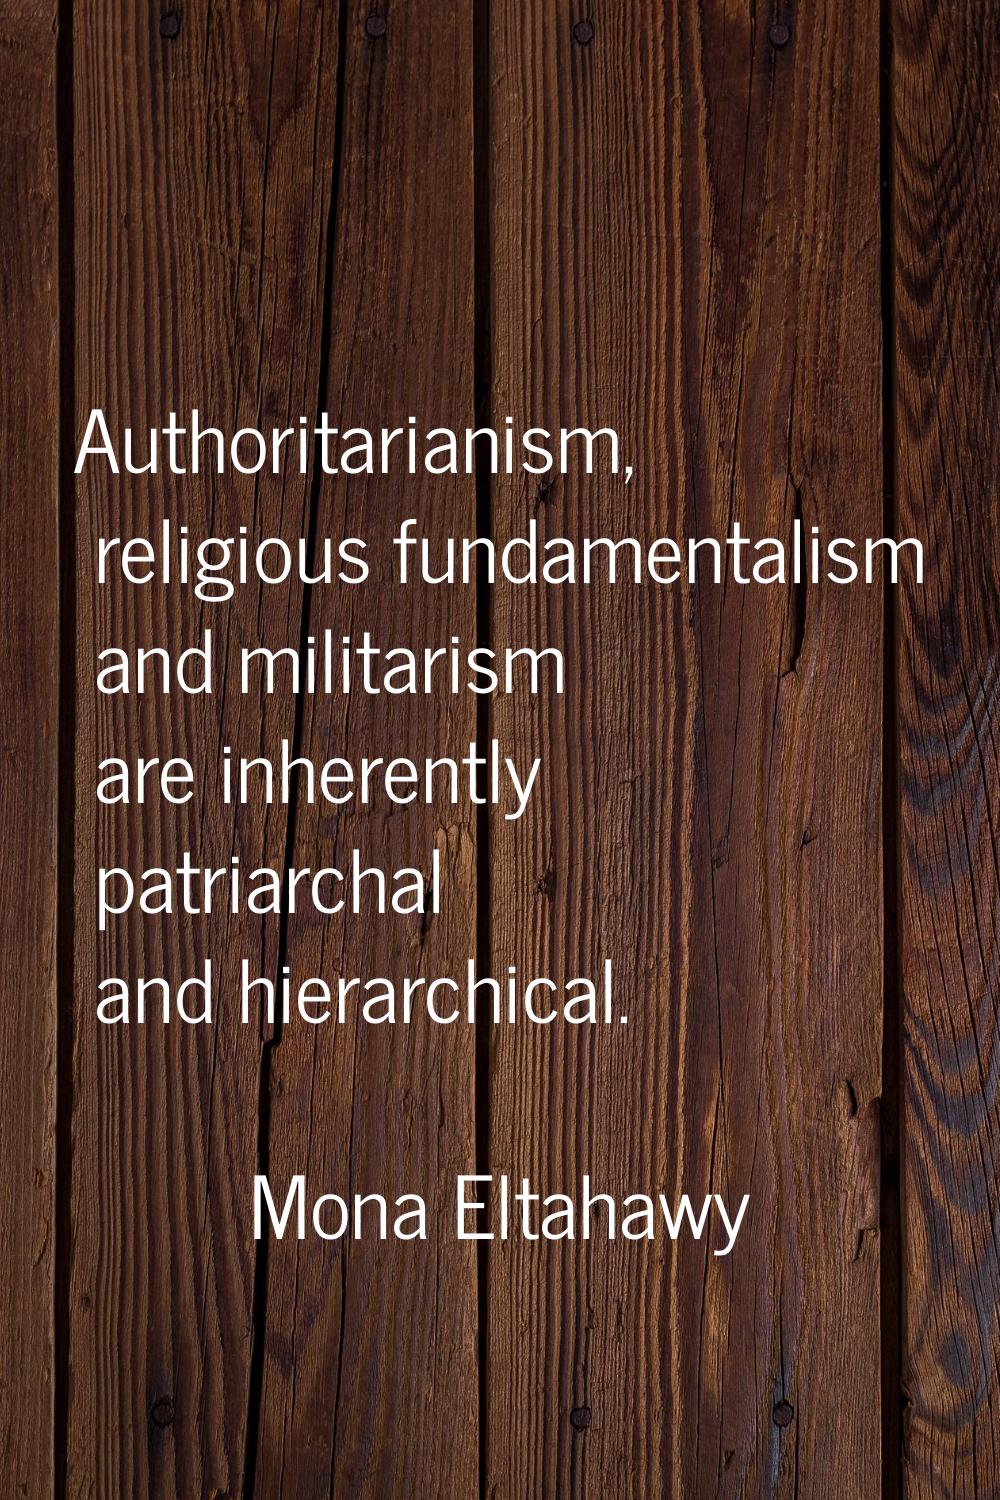 Authoritarianism, religious fundamentalism and militarism are inherently patriarchal and hierarchic